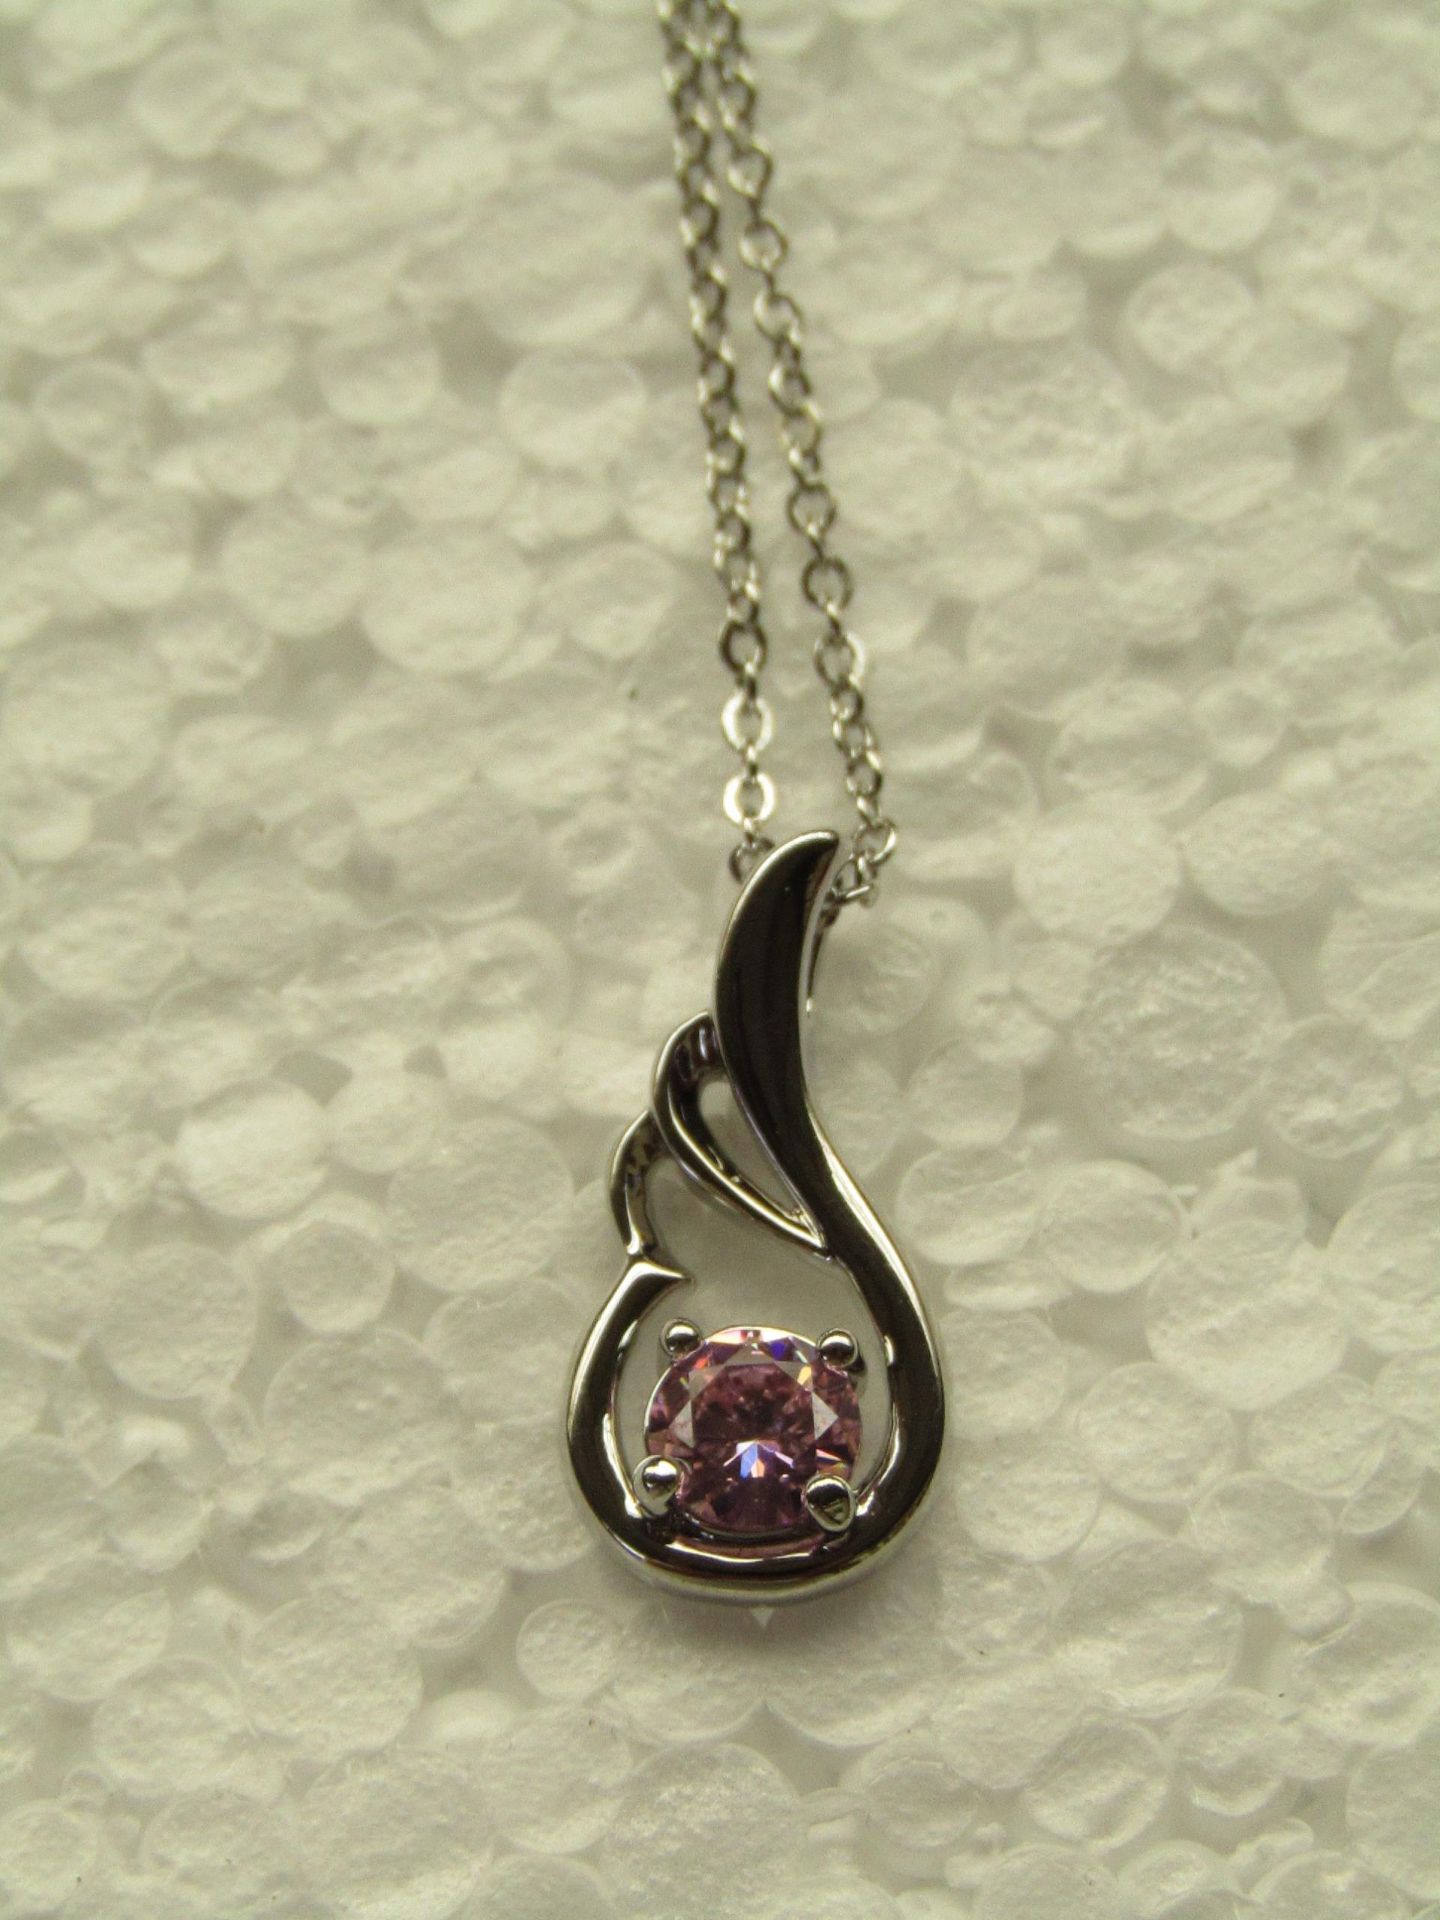 NO VAT!!!! Brand New Fifth NYC Necklace with Swarovski Element Crystals in presentation box